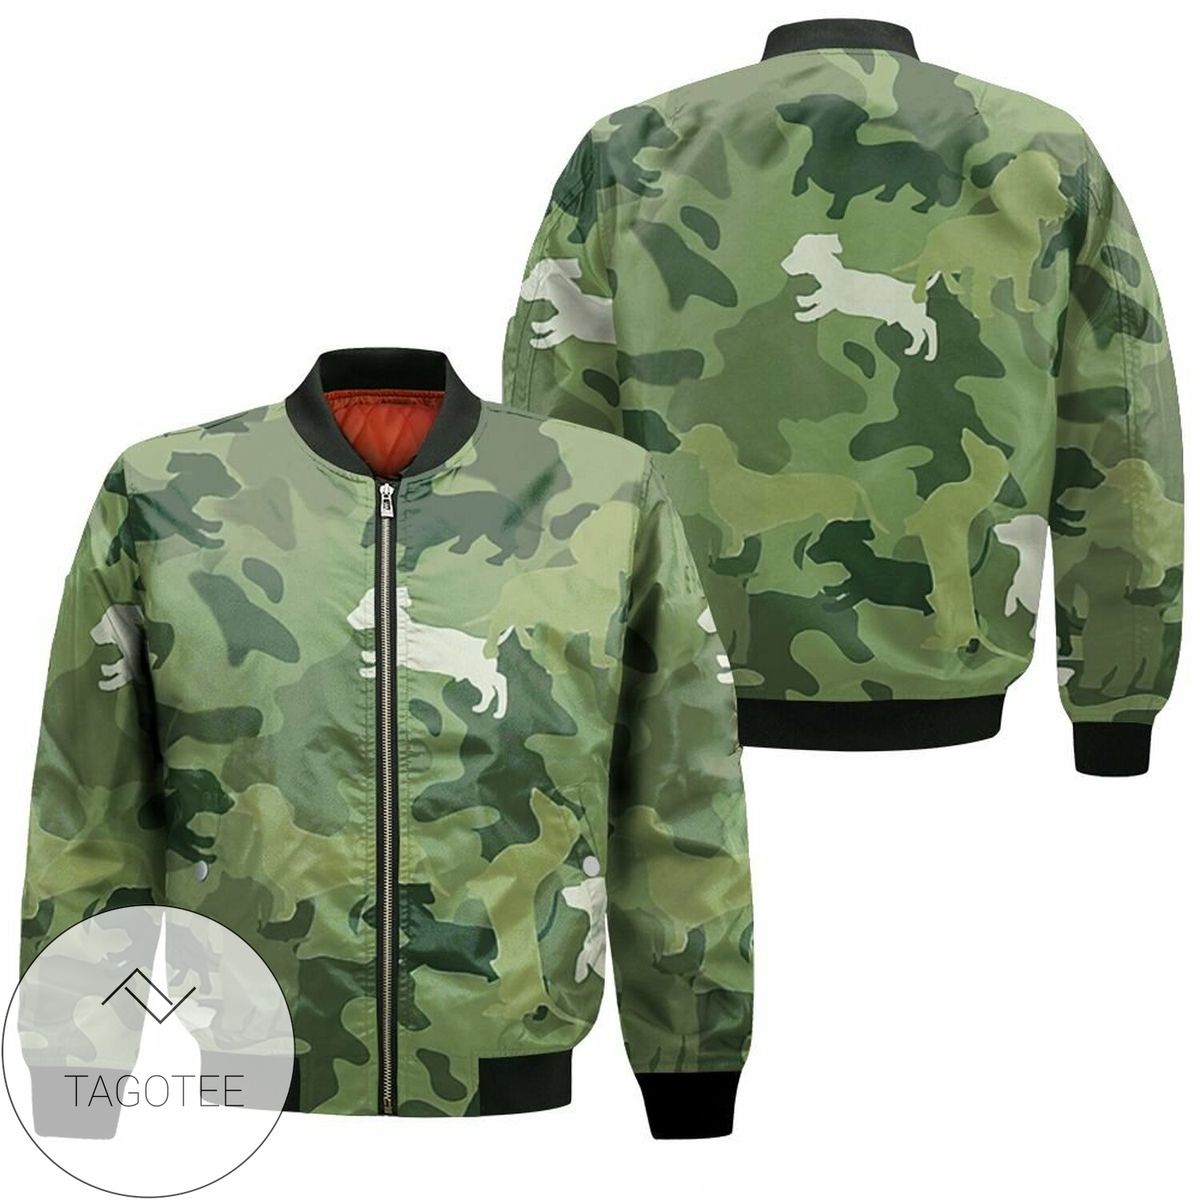 Dachshund Dog Pattern Camouflage Color Style For Dog Lover 3D T Shirt Hoodie Sweater Jersey Bomber Jacket